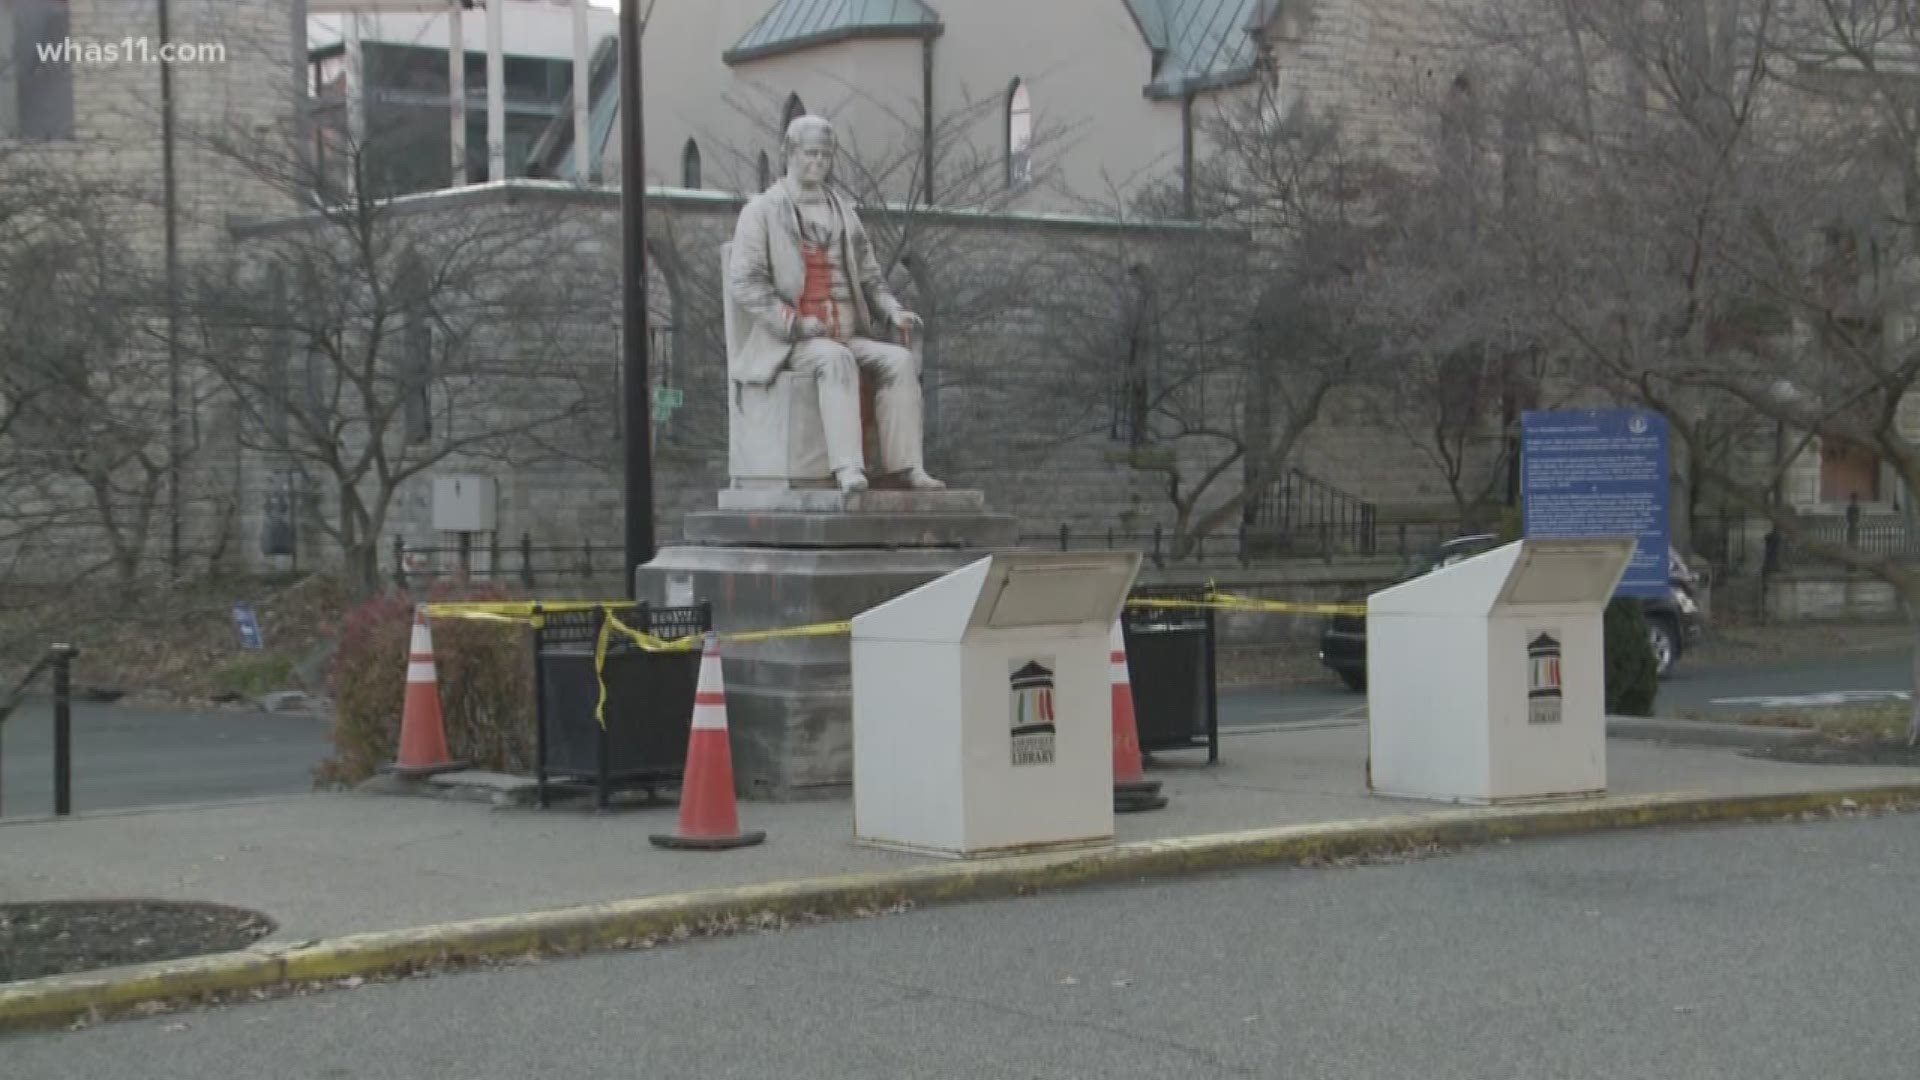 The caution tape and cones are surrounding a statue with Confederate ties in downtown Louisville.